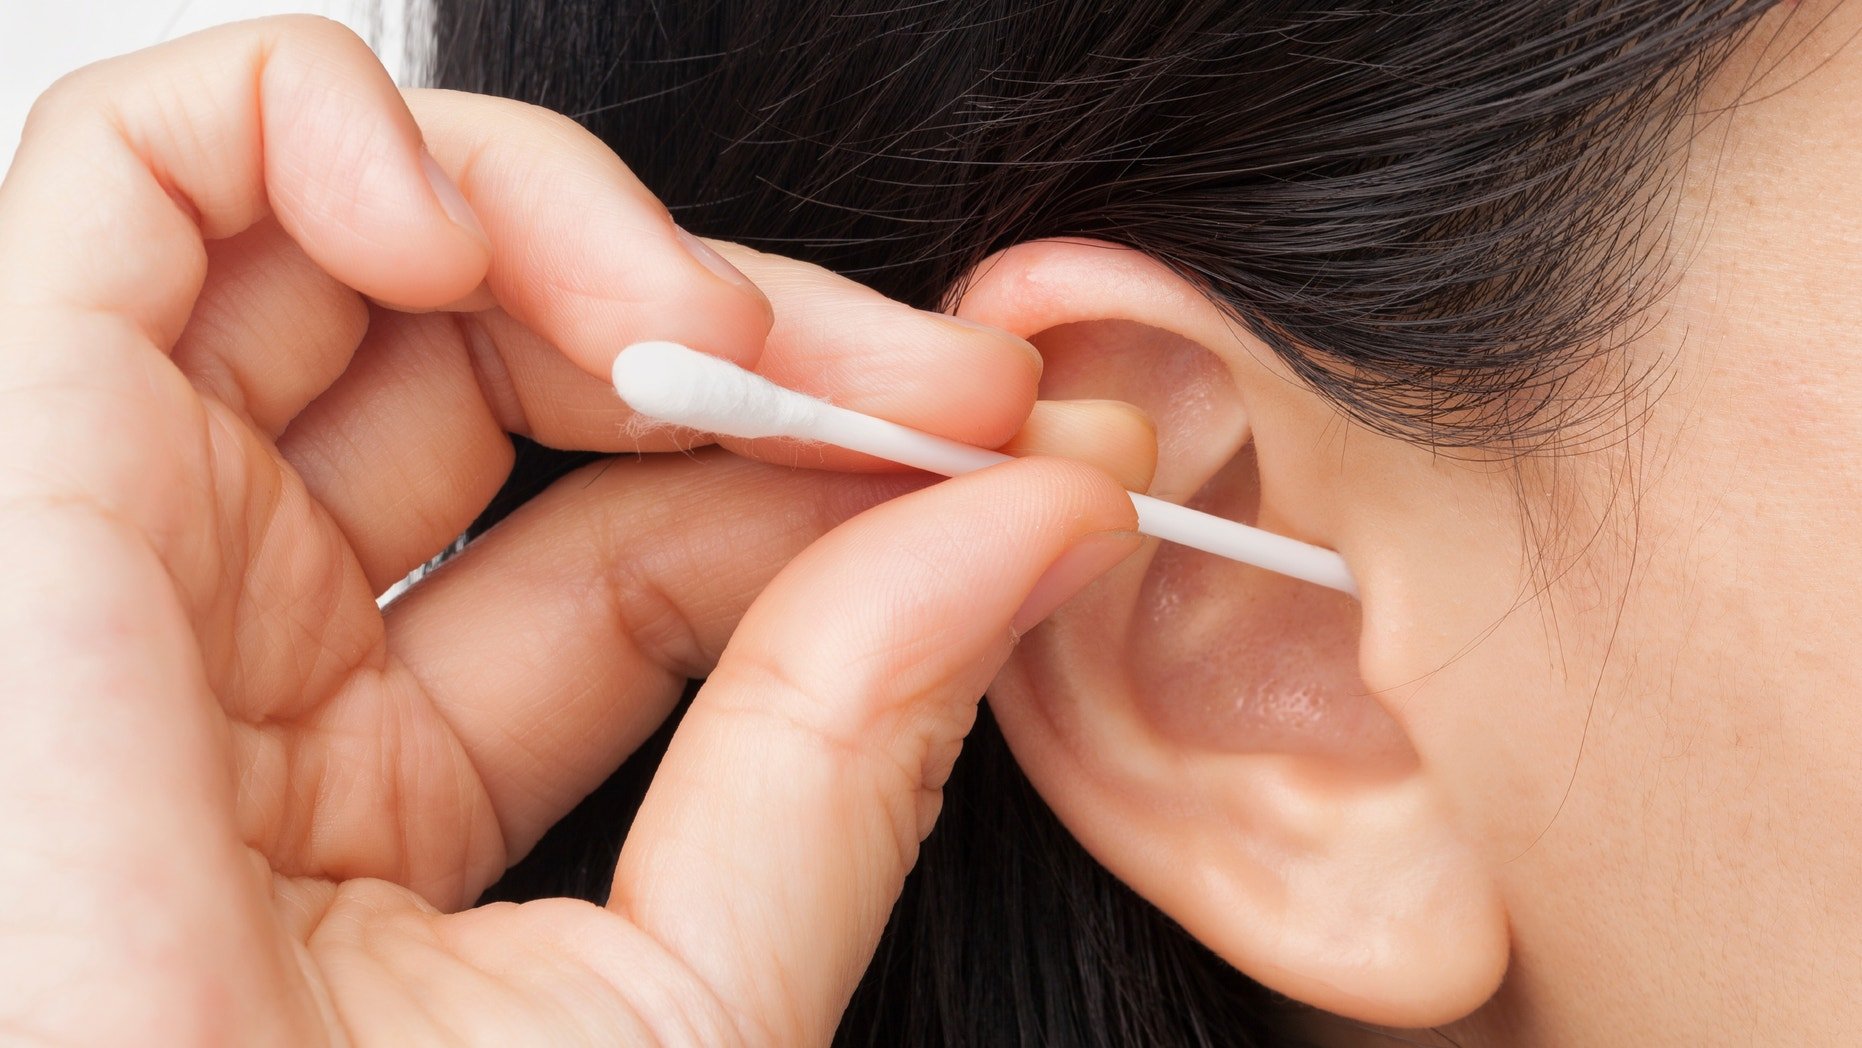 The truth about cleaning your ears with cotton swabs